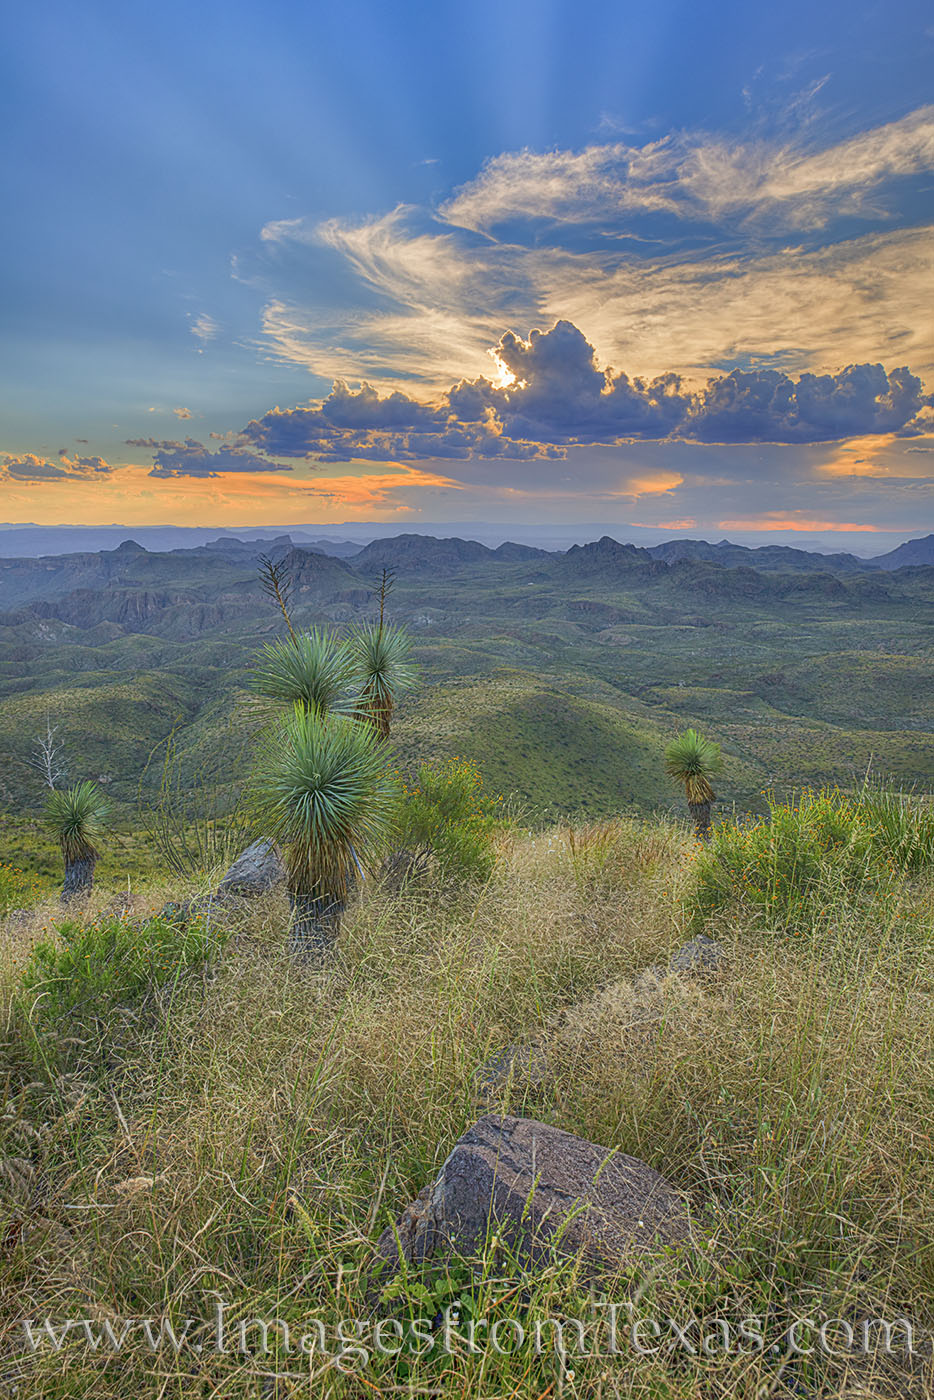 Reaching the summit of Oso Mountain, the tallest point in Big Bend Ranch State Park, does not come easy. From Presidio, a 30...